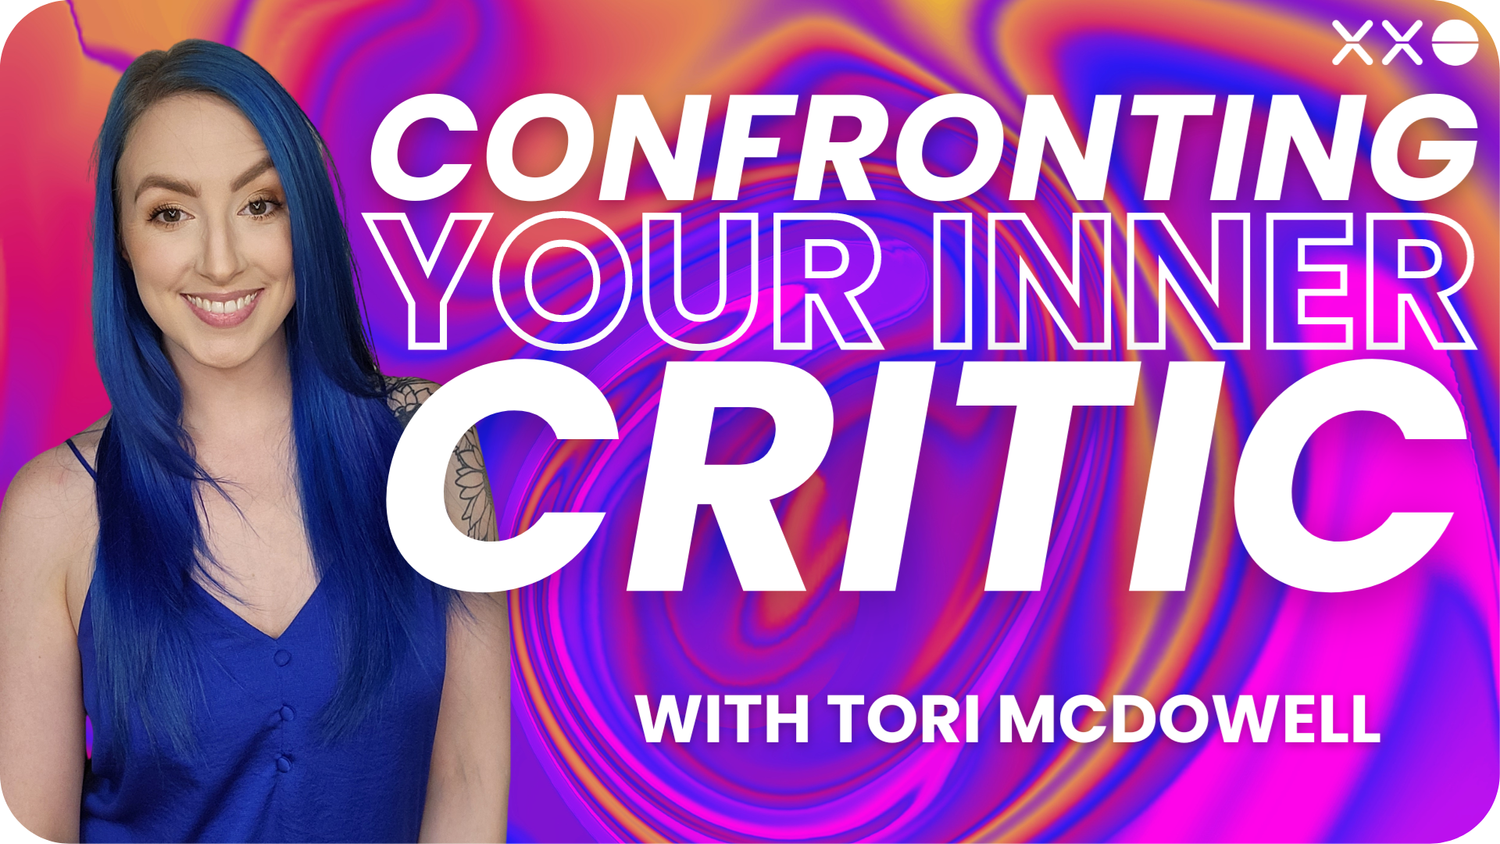 TORI+MCDOWELL+XXO+CONNECT+CONFRONTING+YOUR+INNER+CRITIC+WHOLE+HUMAN+CONNECTION+EXPERIENCE (2).png